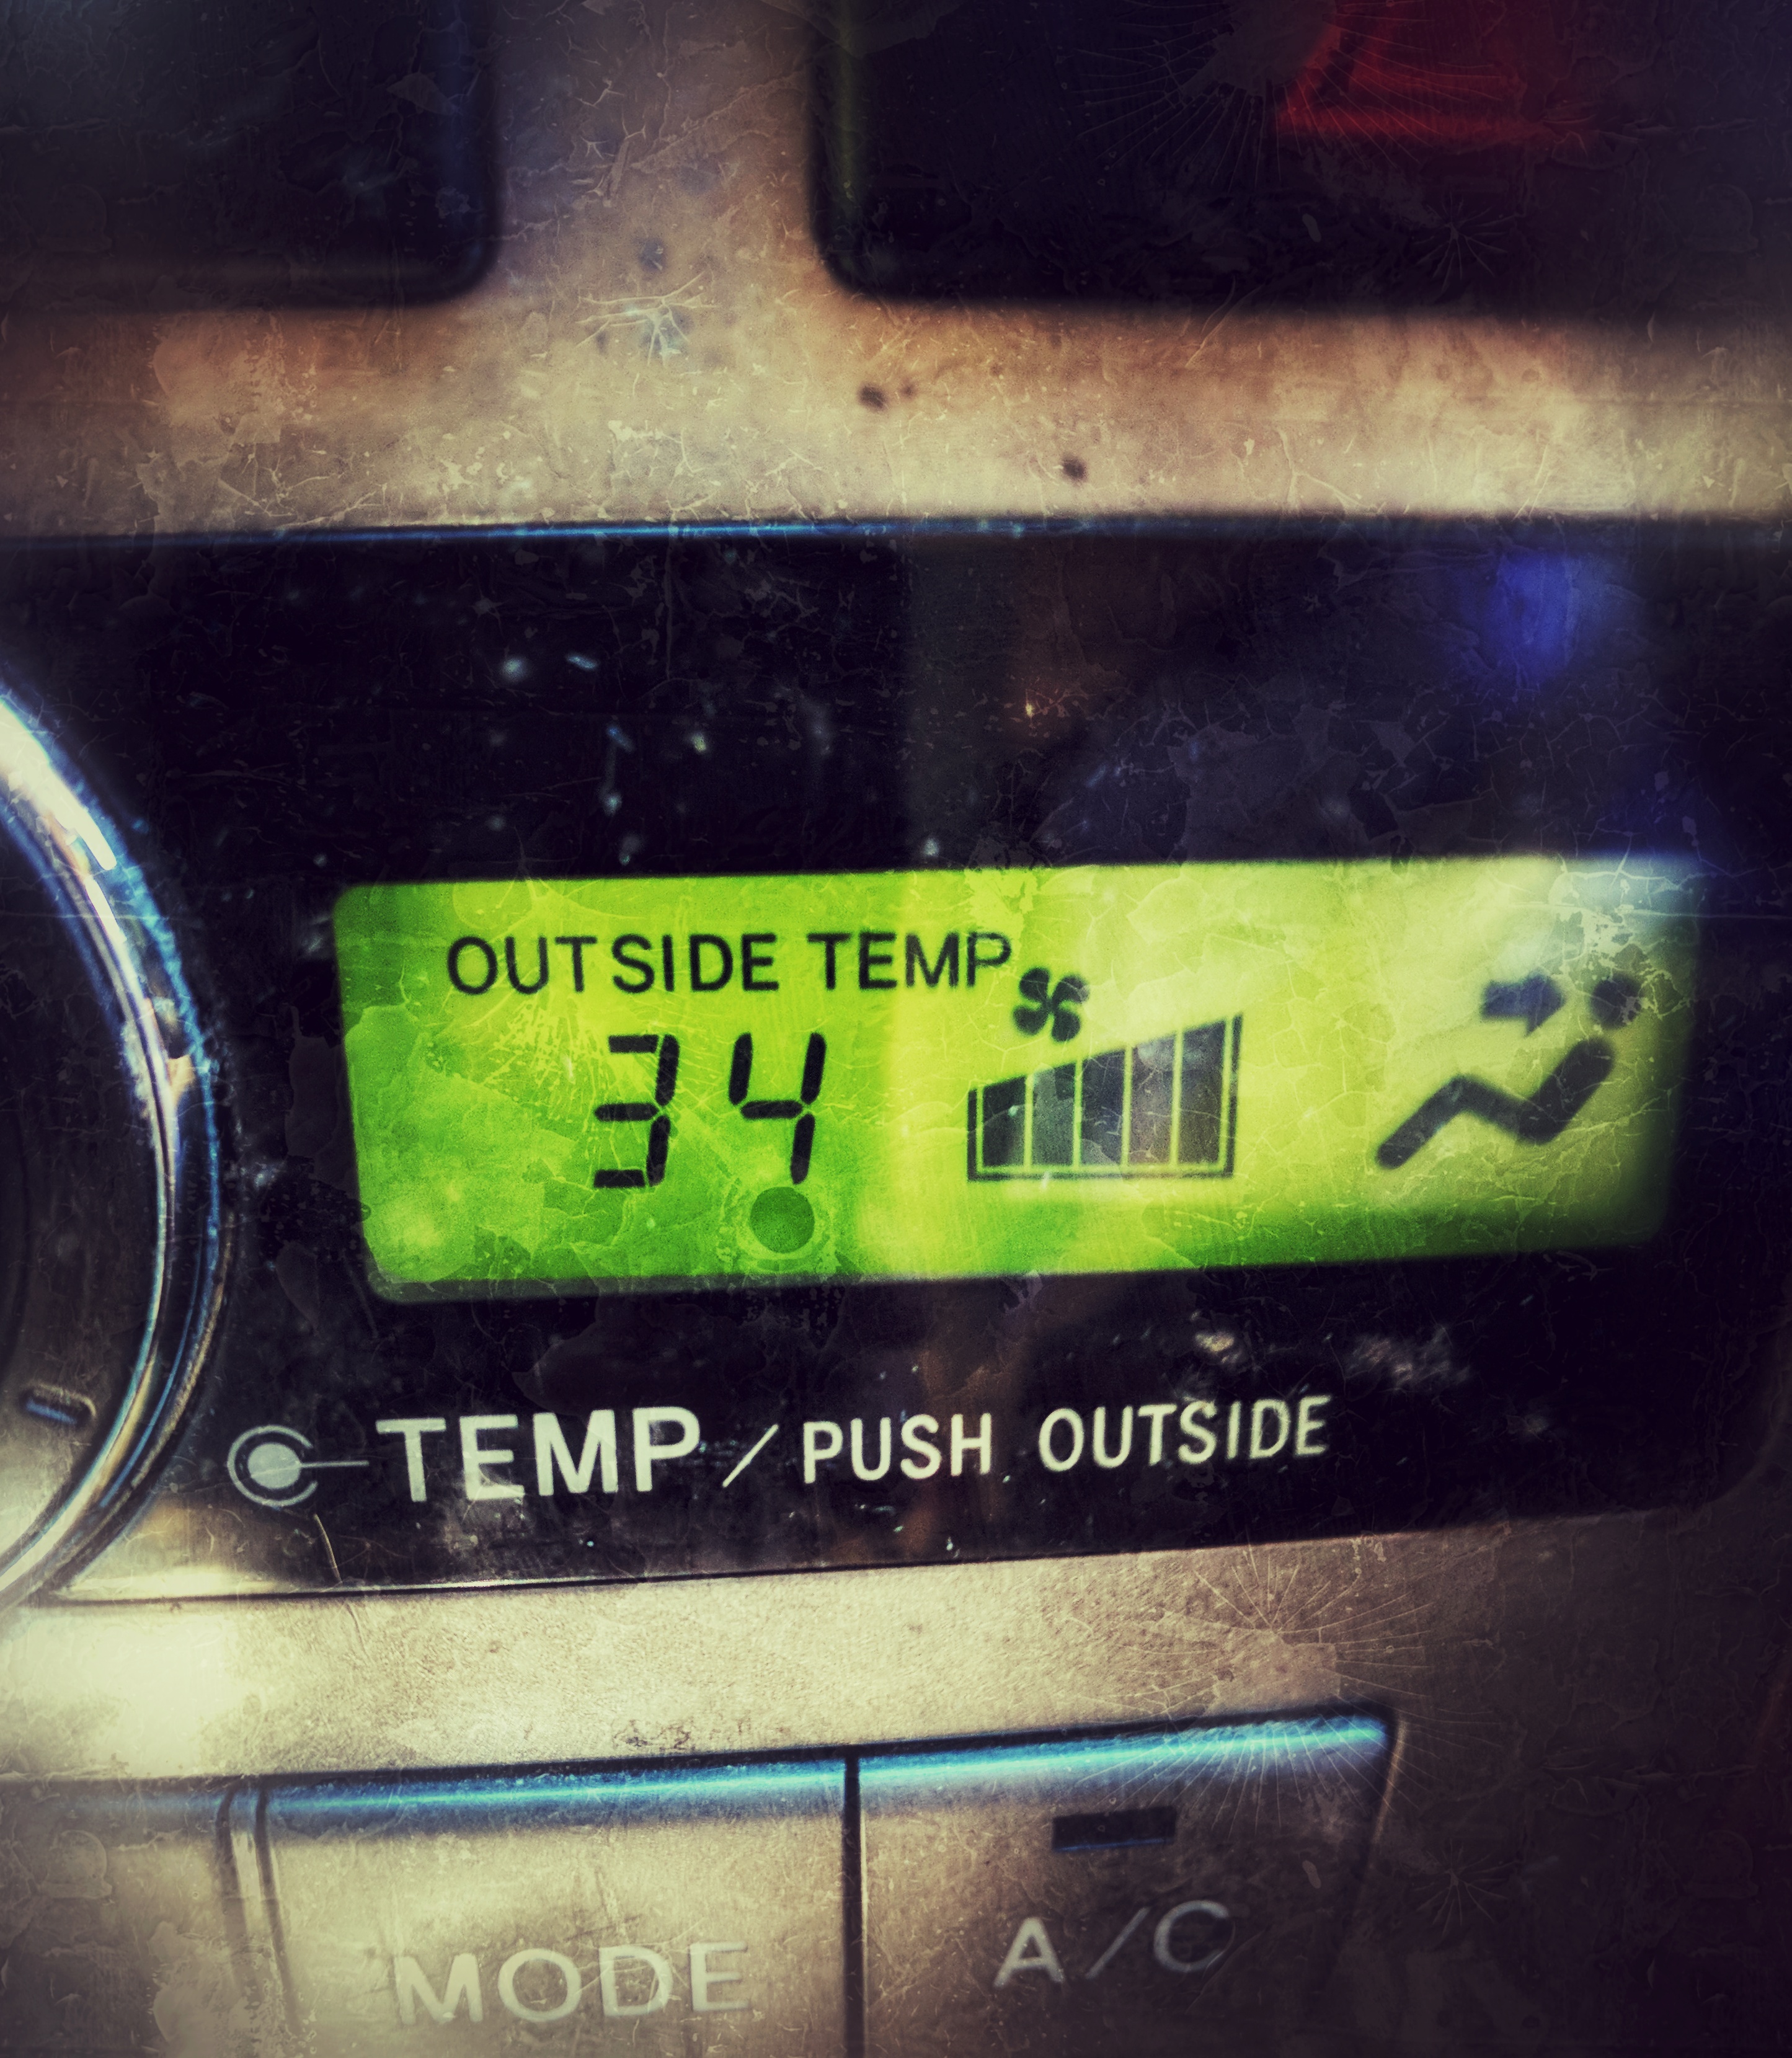 Outside temperature of 34c